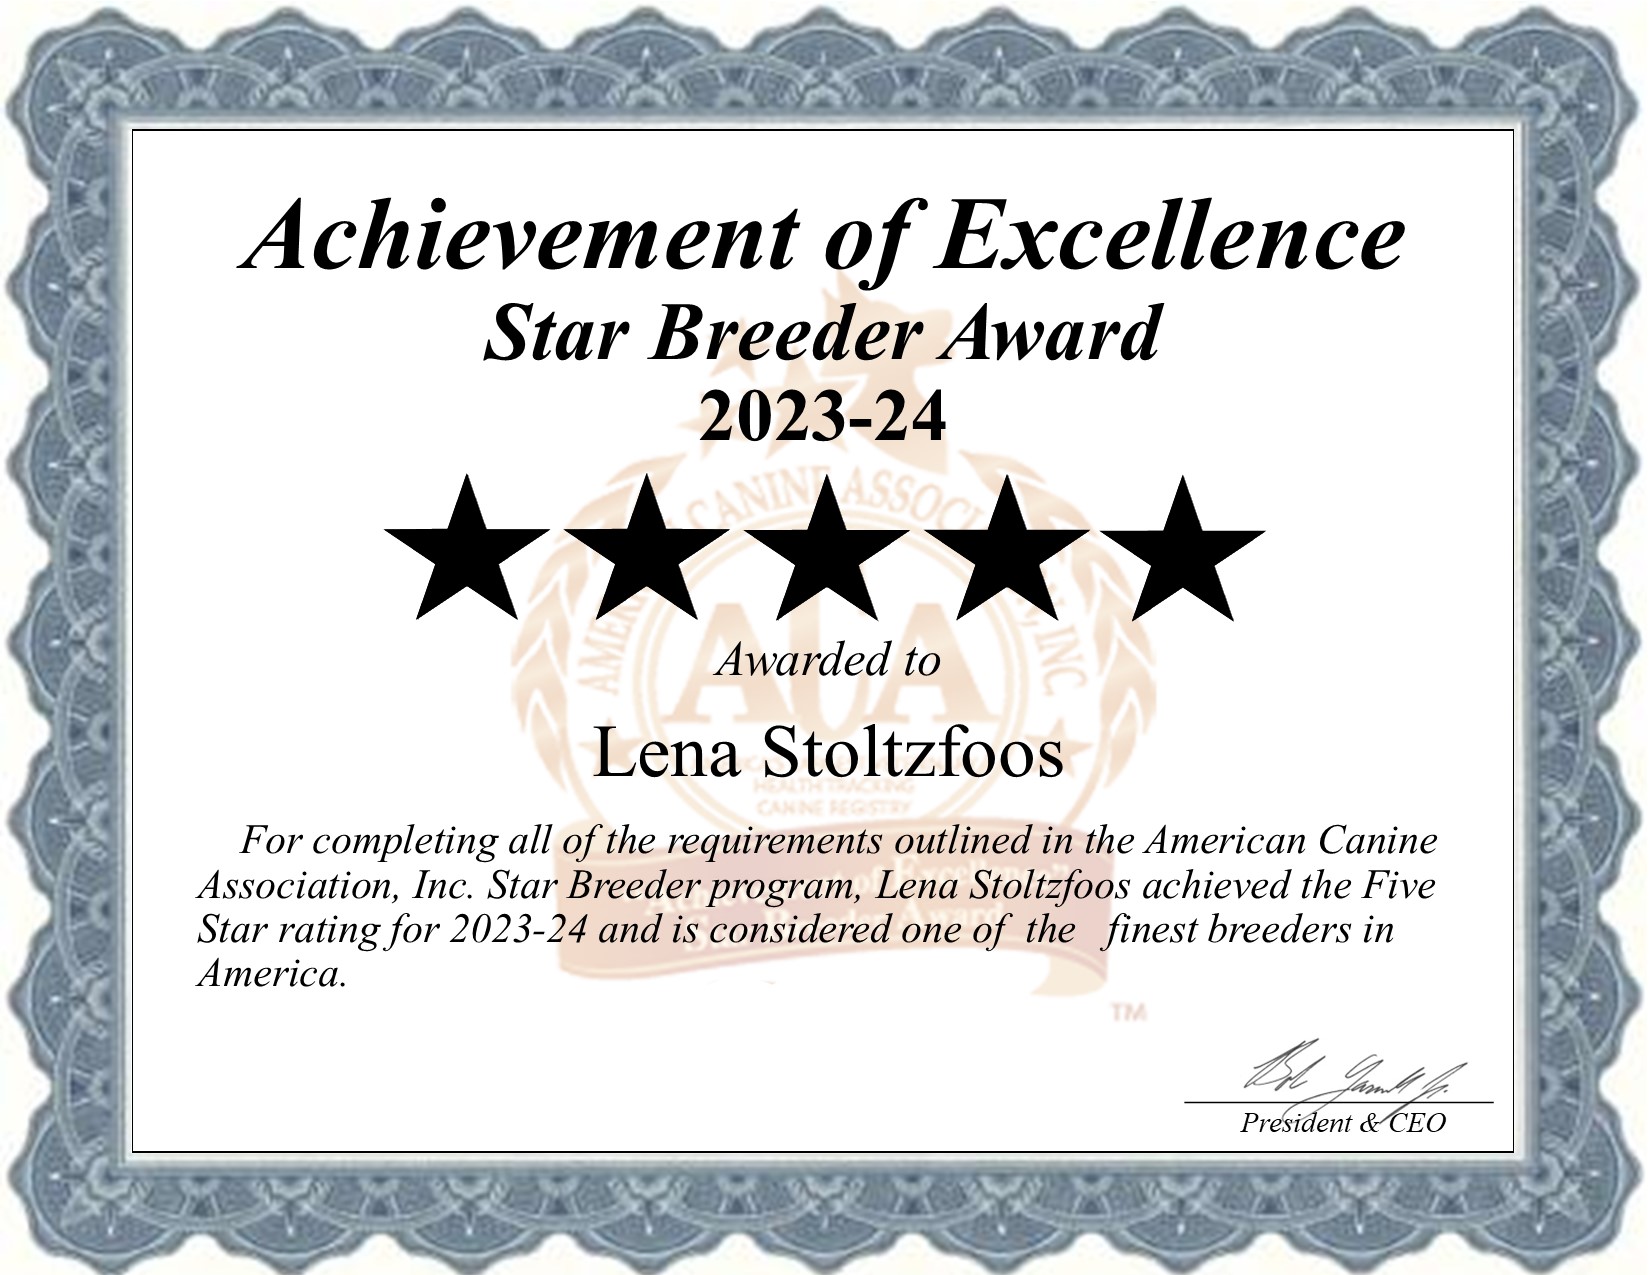 Lena, Stoltzfoos, dog, breeder, star, certificate, Lena-Stoltzfoos, Fort Plain, NY, New York, puppy, dog, kennels, mill, puppymill, usda, 5-star, aca, ica, registered, Miniature Poodle